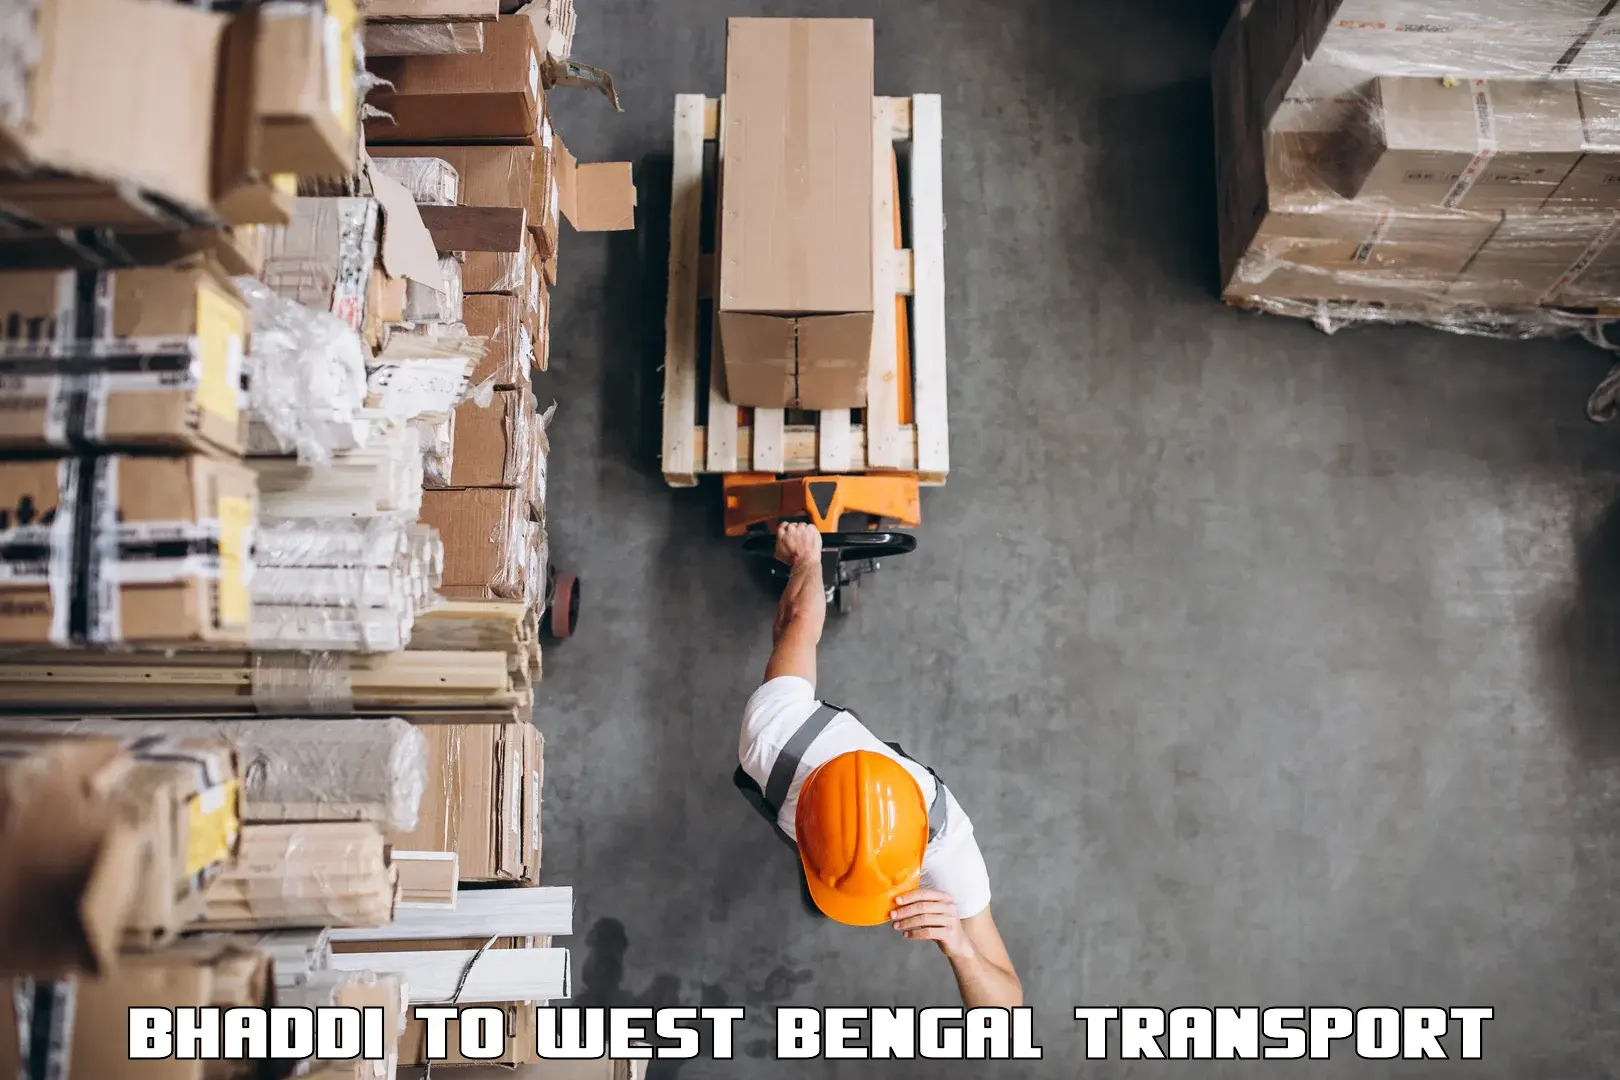 Truck transport companies in India Bhaddi to North 24 Parganas